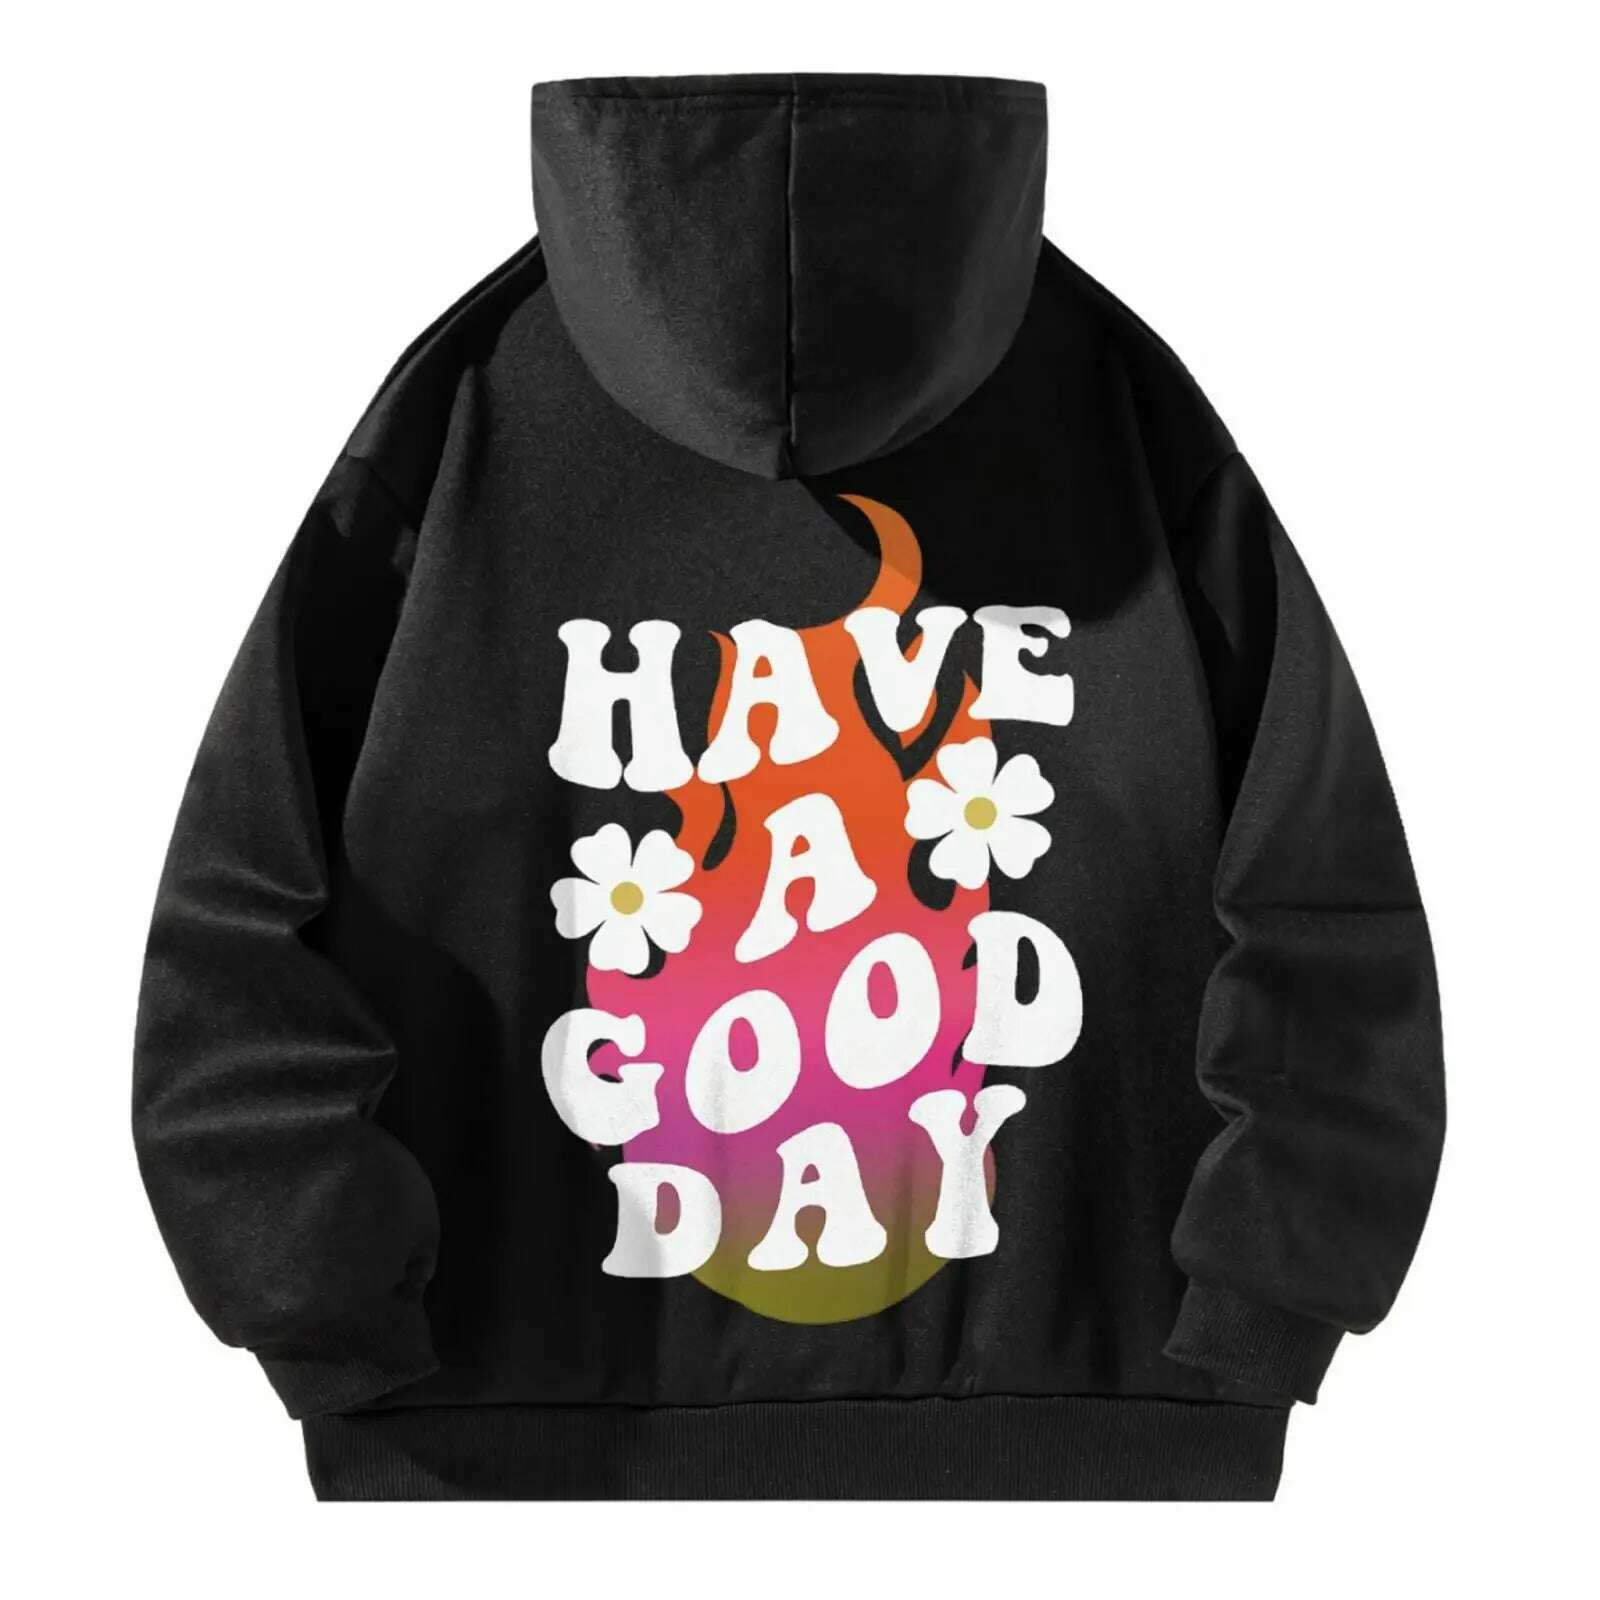 KIMLUD, Female Causal Hoodies Letter Print Design on Back for Outdoor Work Indoor Women Clothes Female Pullover Hoodies, Black / M, KIMLUD Womens Clothes